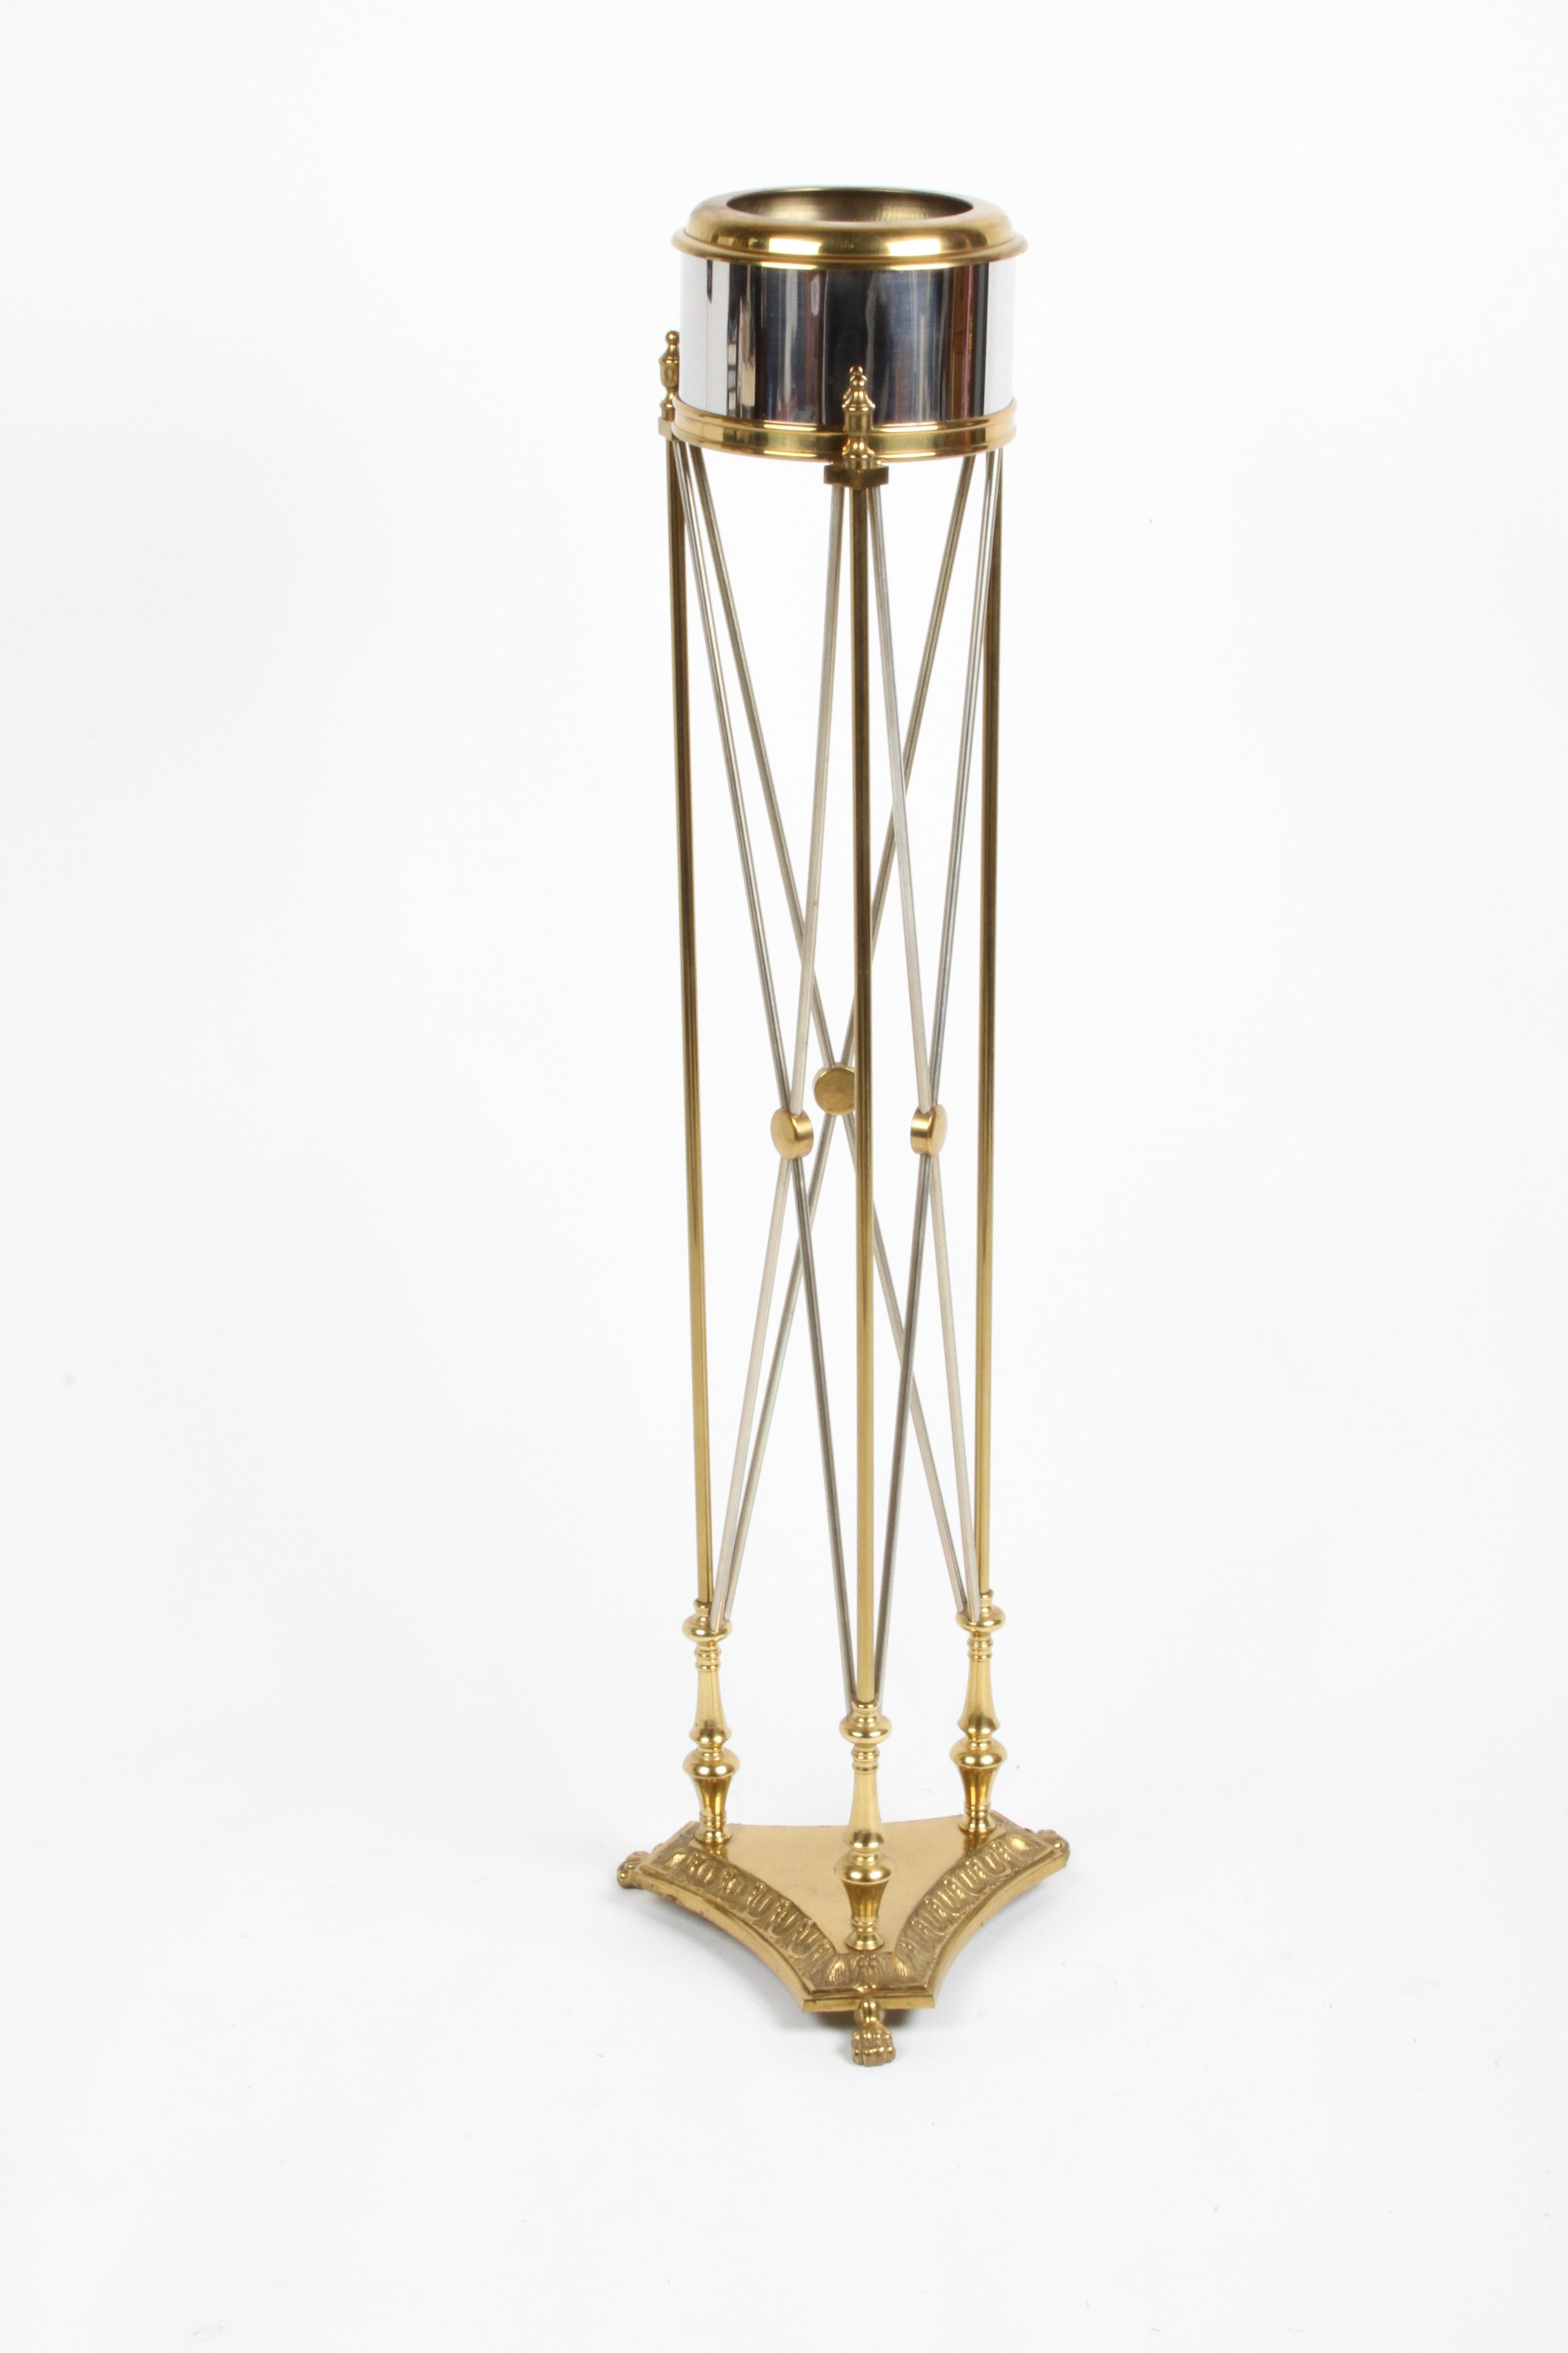 1980s vintage jardinière in the Empire style manufactured by Maitland-Smith with cylindrical polished-chrome planter trimmed with brass. Planter connects to cast tripod brass base with claw feet by Directoire style intersecting chrome rods with